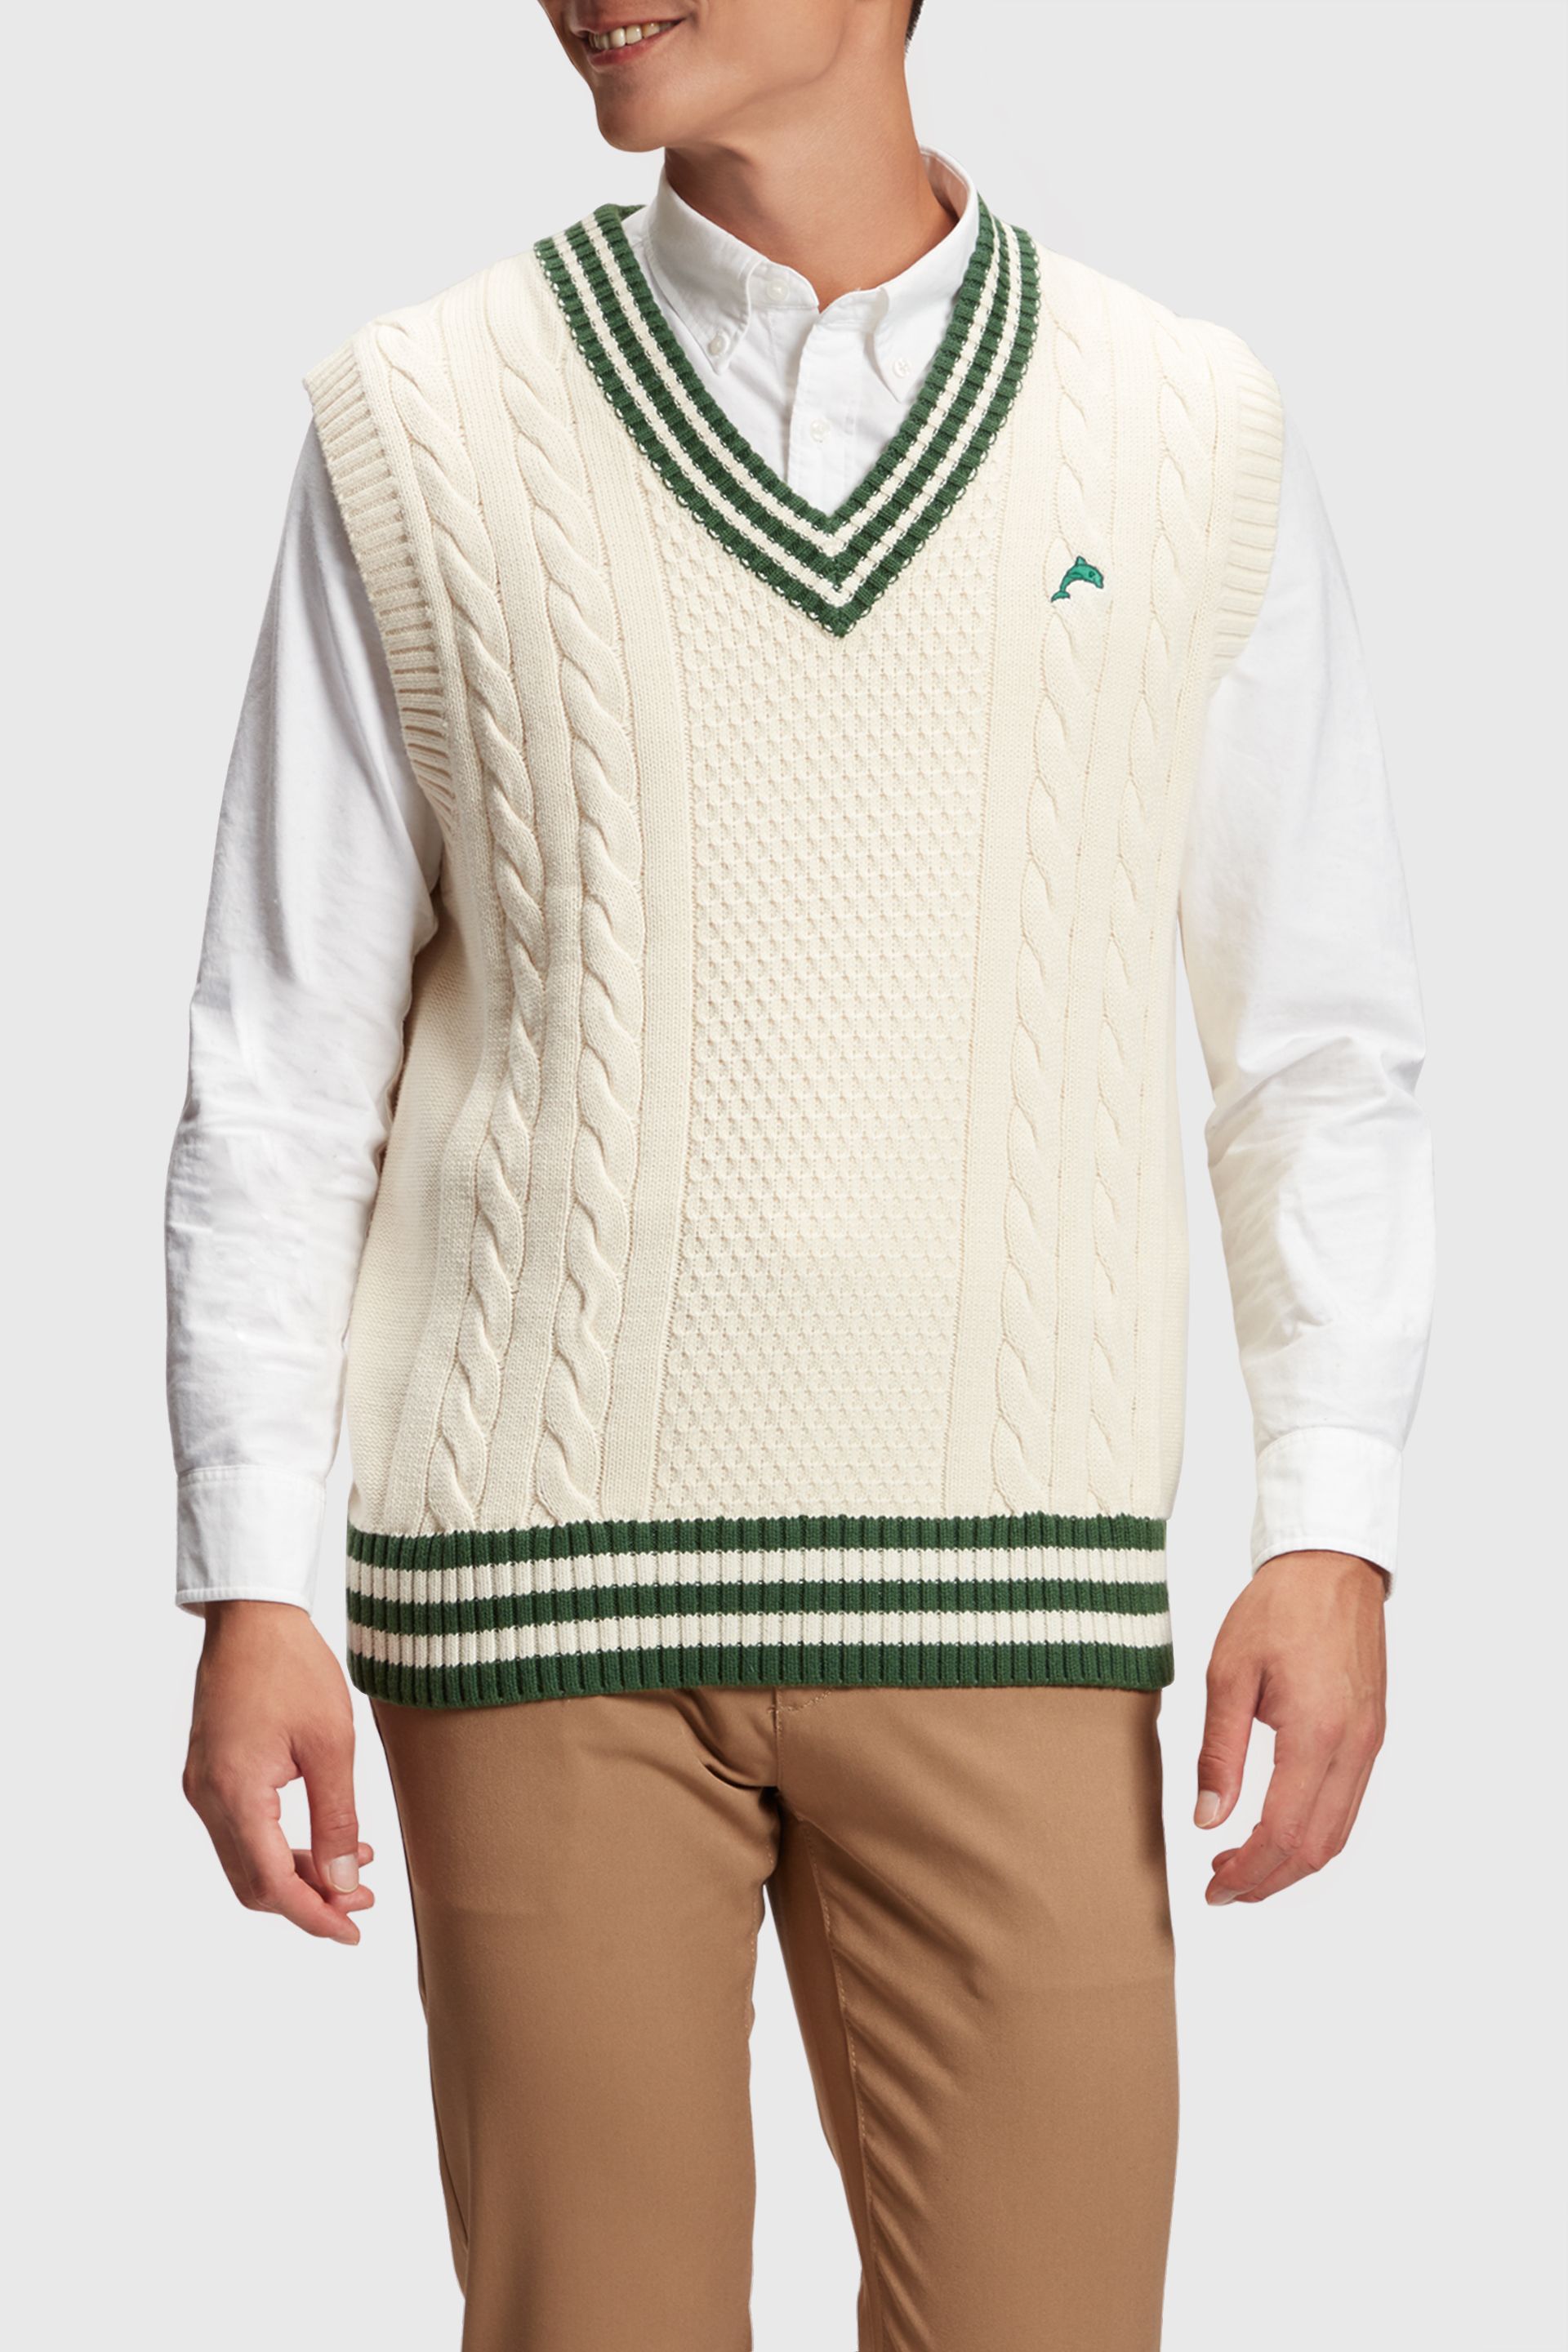 Plaid Sweater Vest  Shop the Highest Quality Golf Apparel Gear  Accessories and Golf Clubs at PXG